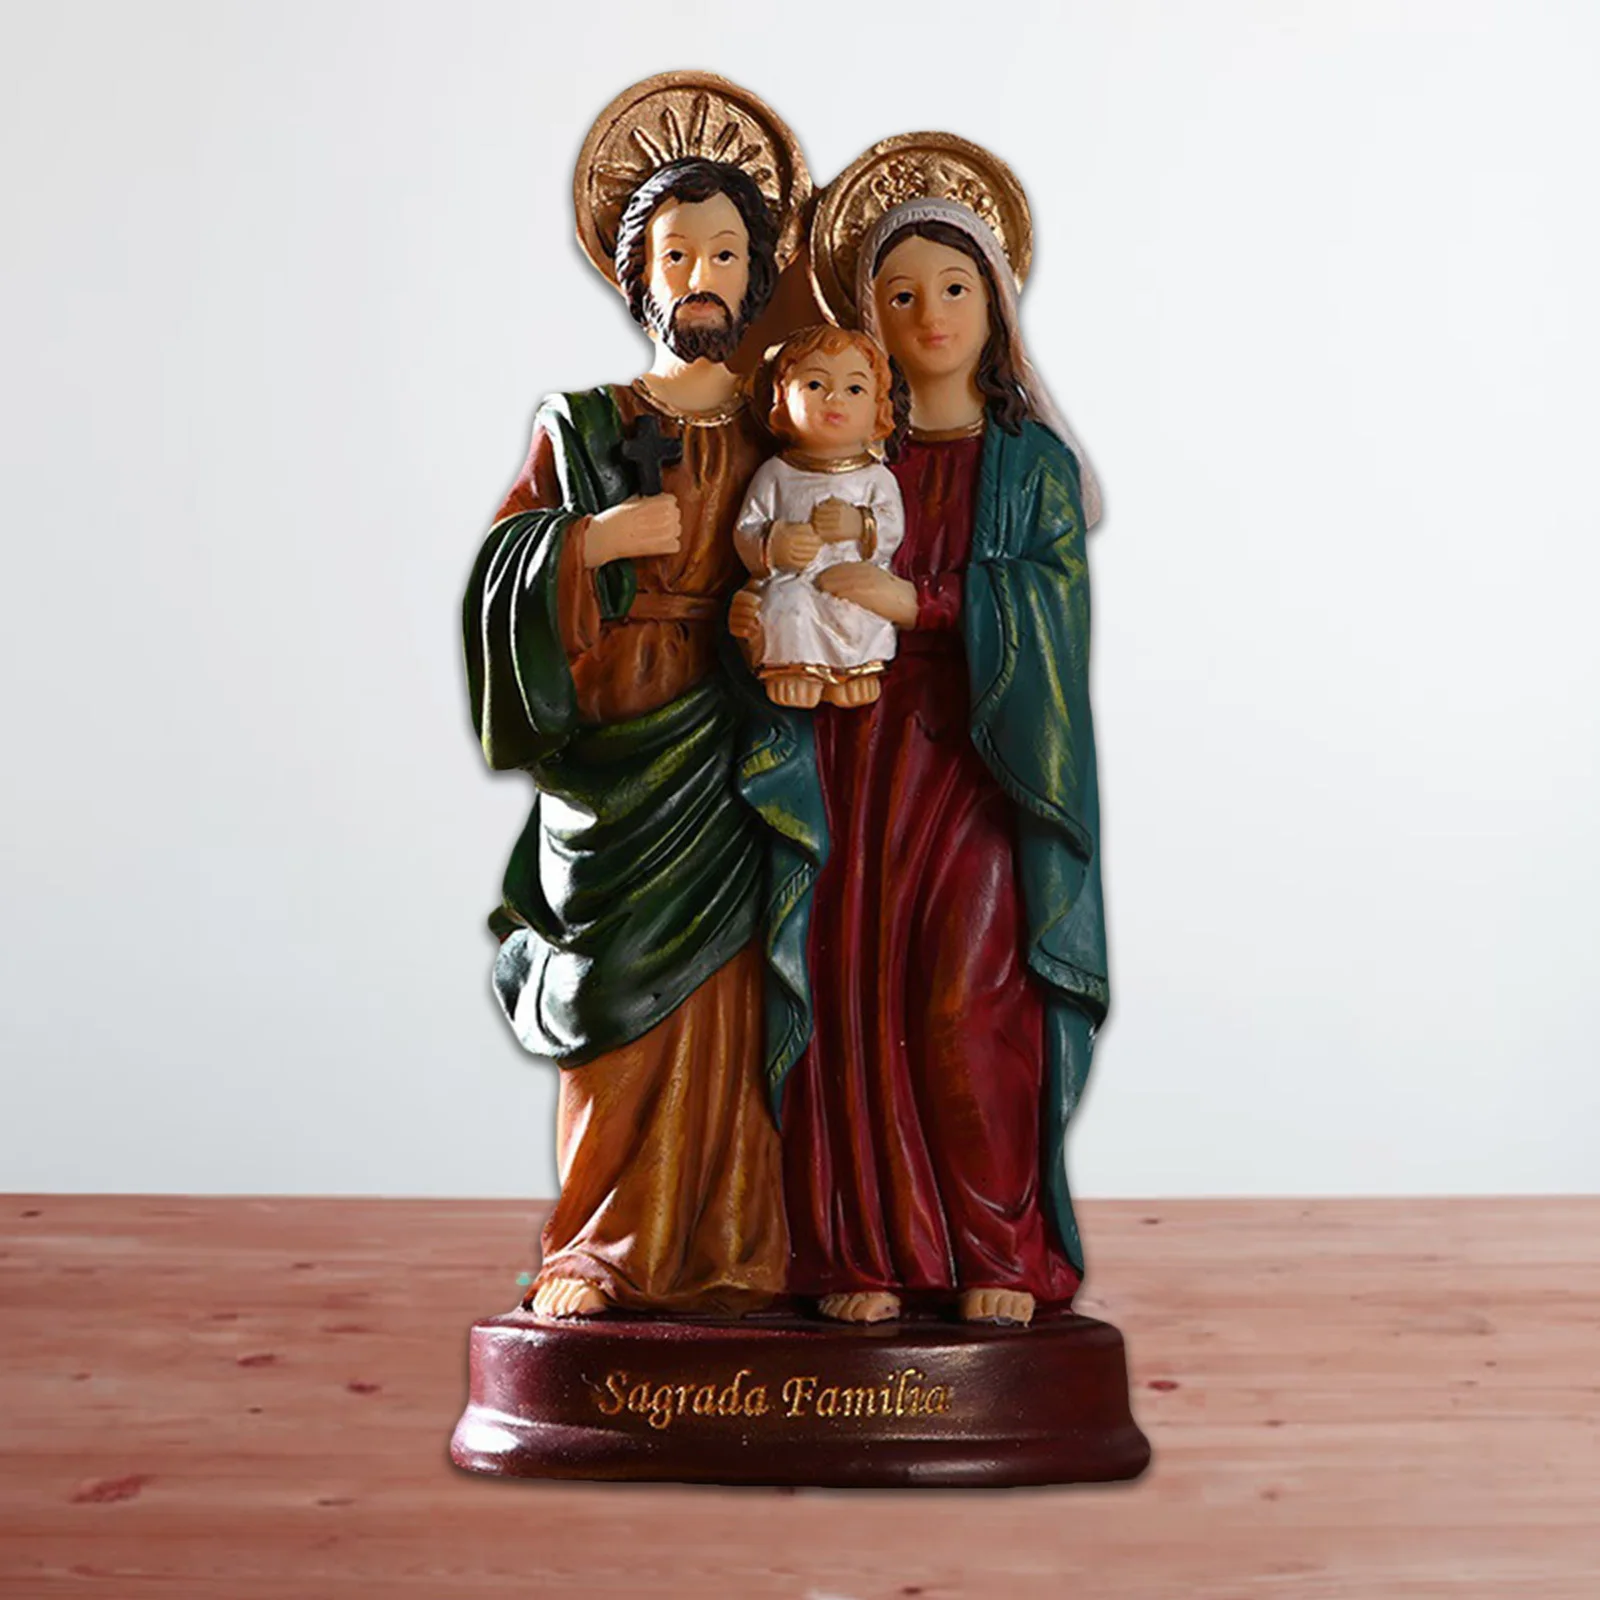 Holy Family Statues Figure Child Jesus Christ Figurine Home Decorative Sculptures Catholic Church Souvenirs Gifts